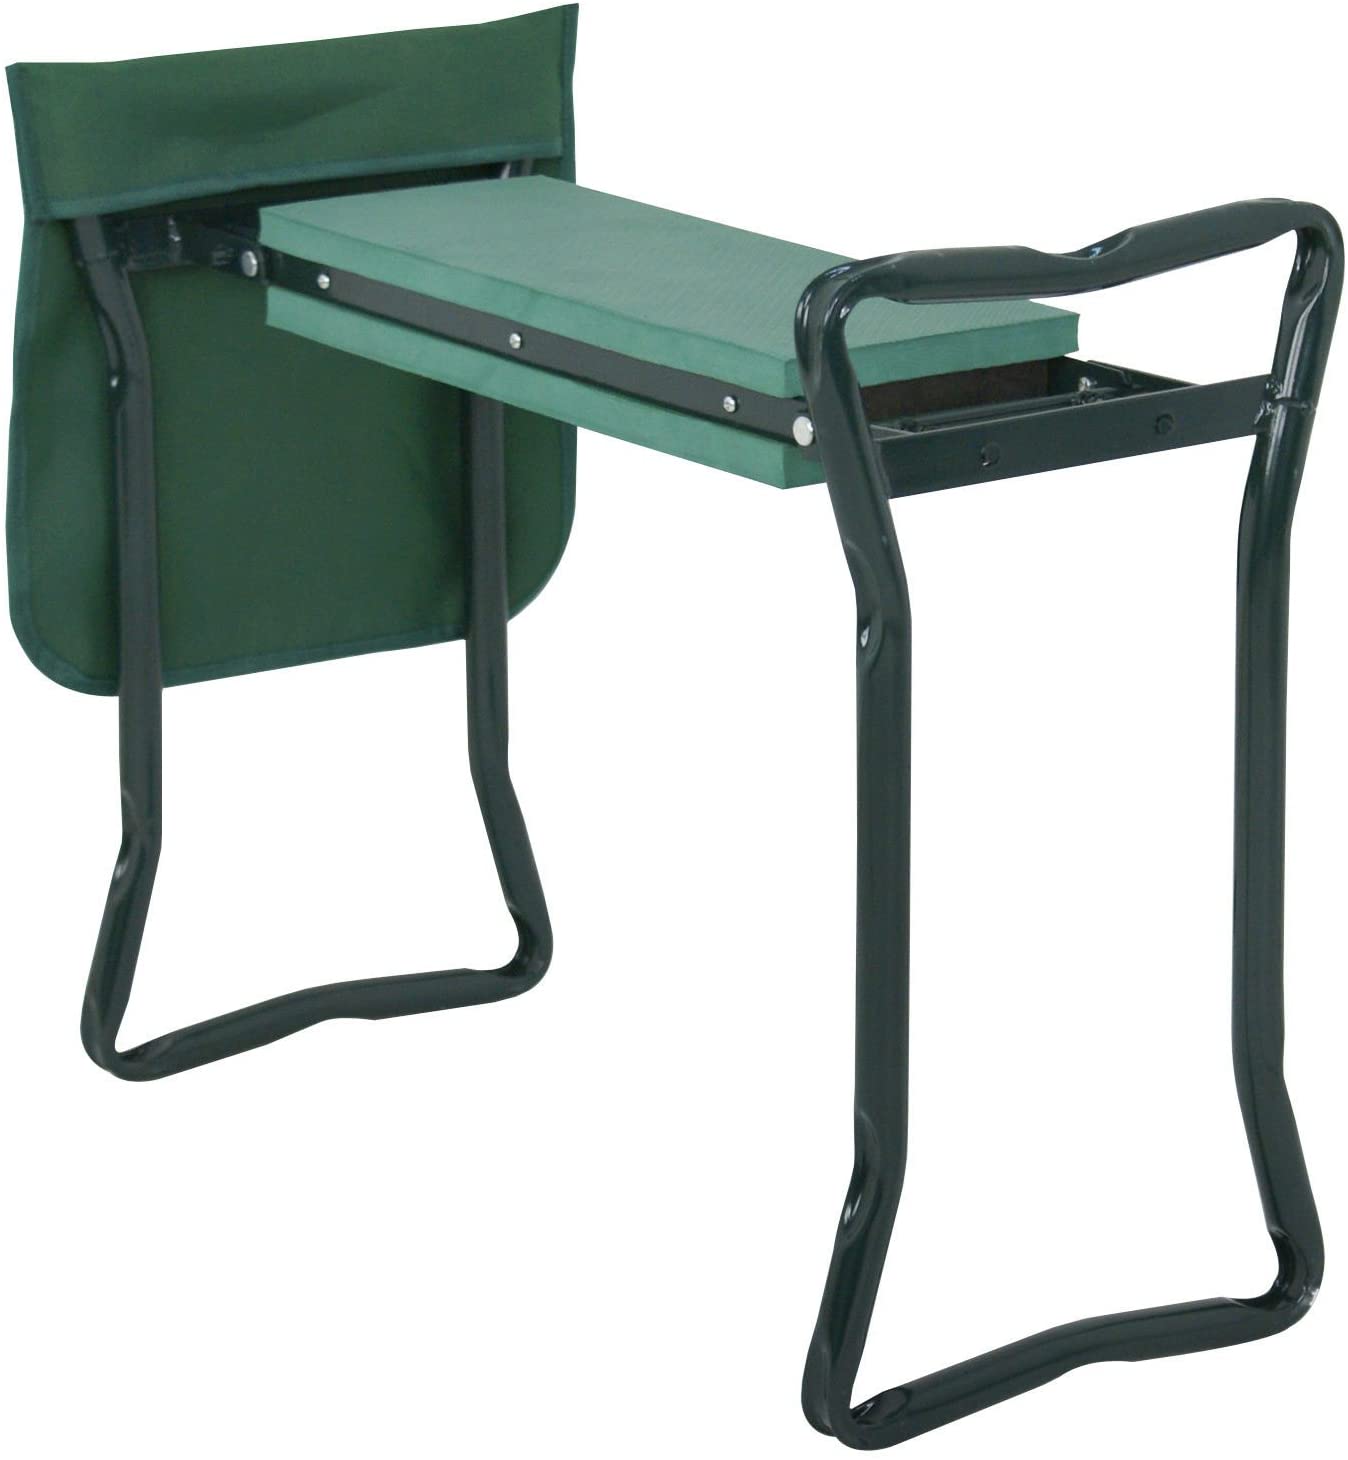 Garden Kneeler and Seat Bench Stools Foldable Stool with Free Tool Bag Pouch EVA Foam Pad